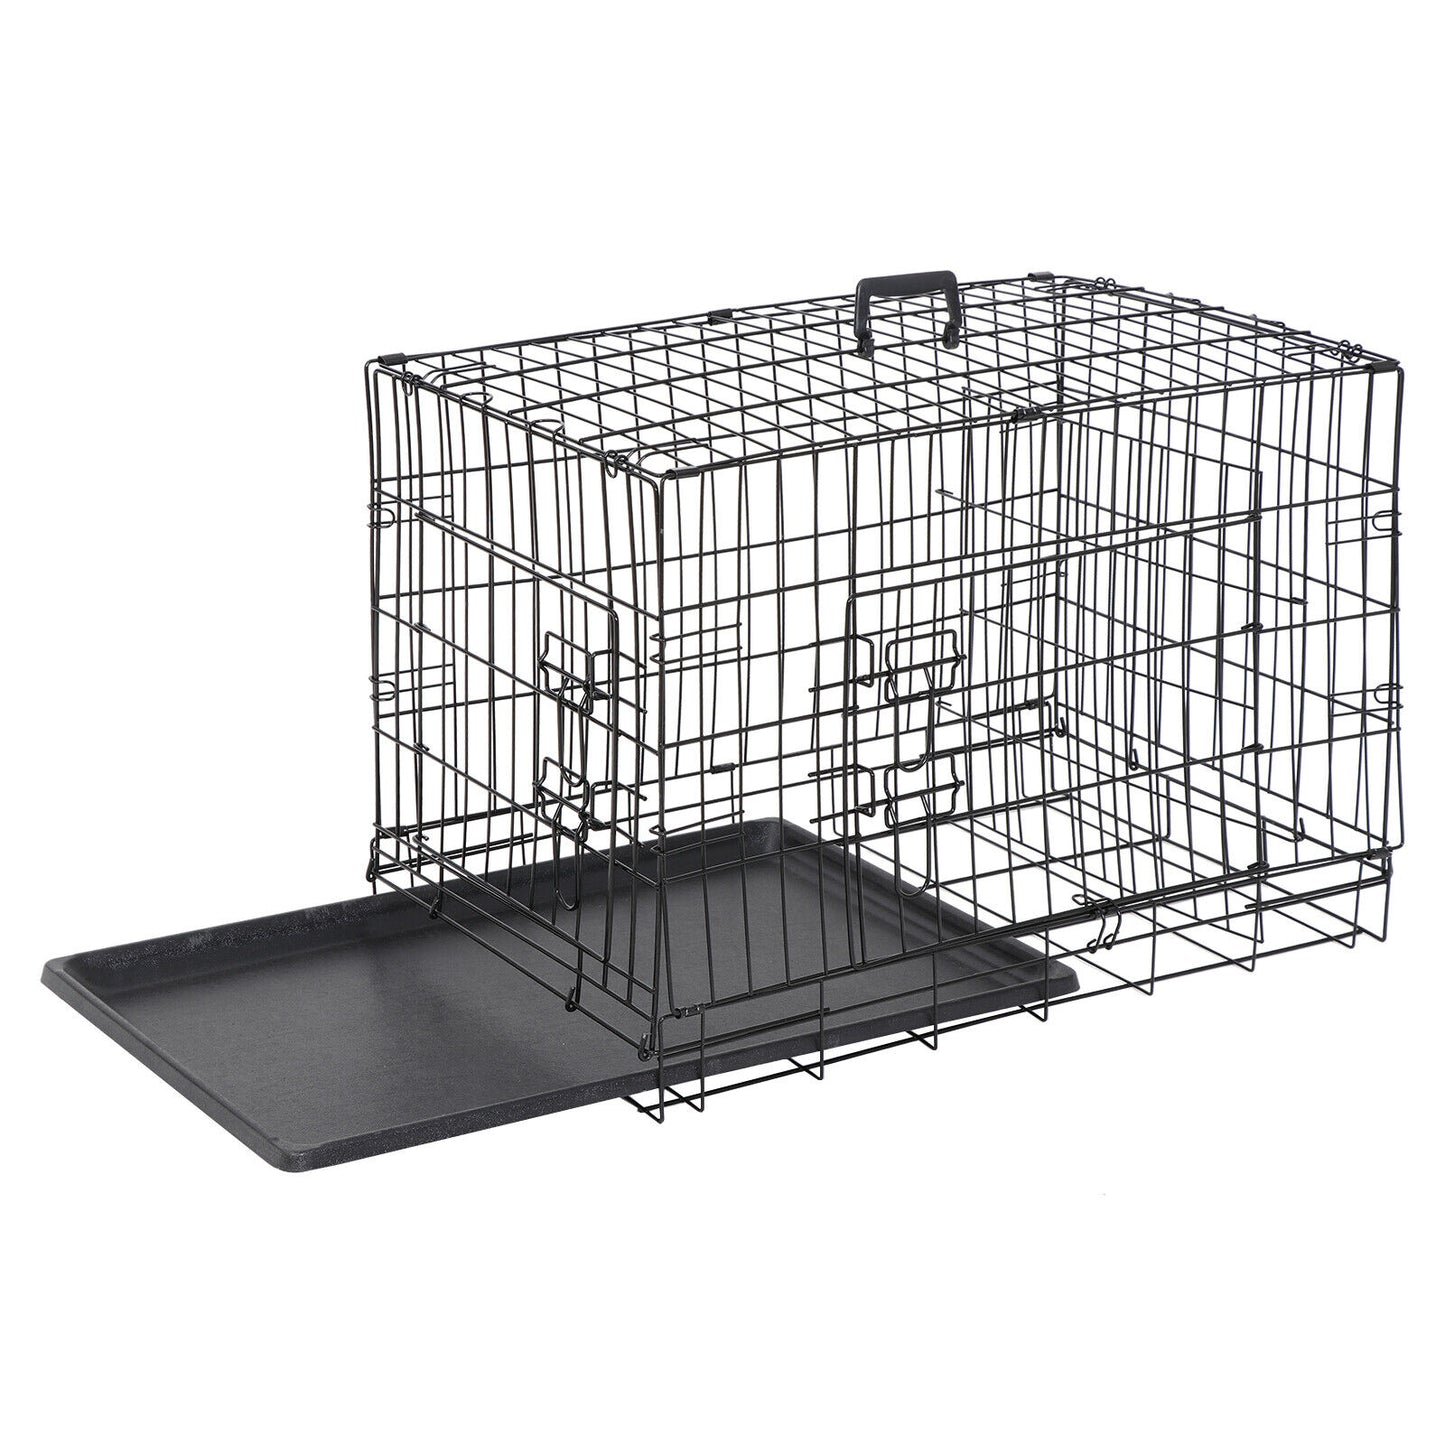 30"Double Door Dog Crates Folding Metal Pet Cat Cage Kennel with Tray in Black